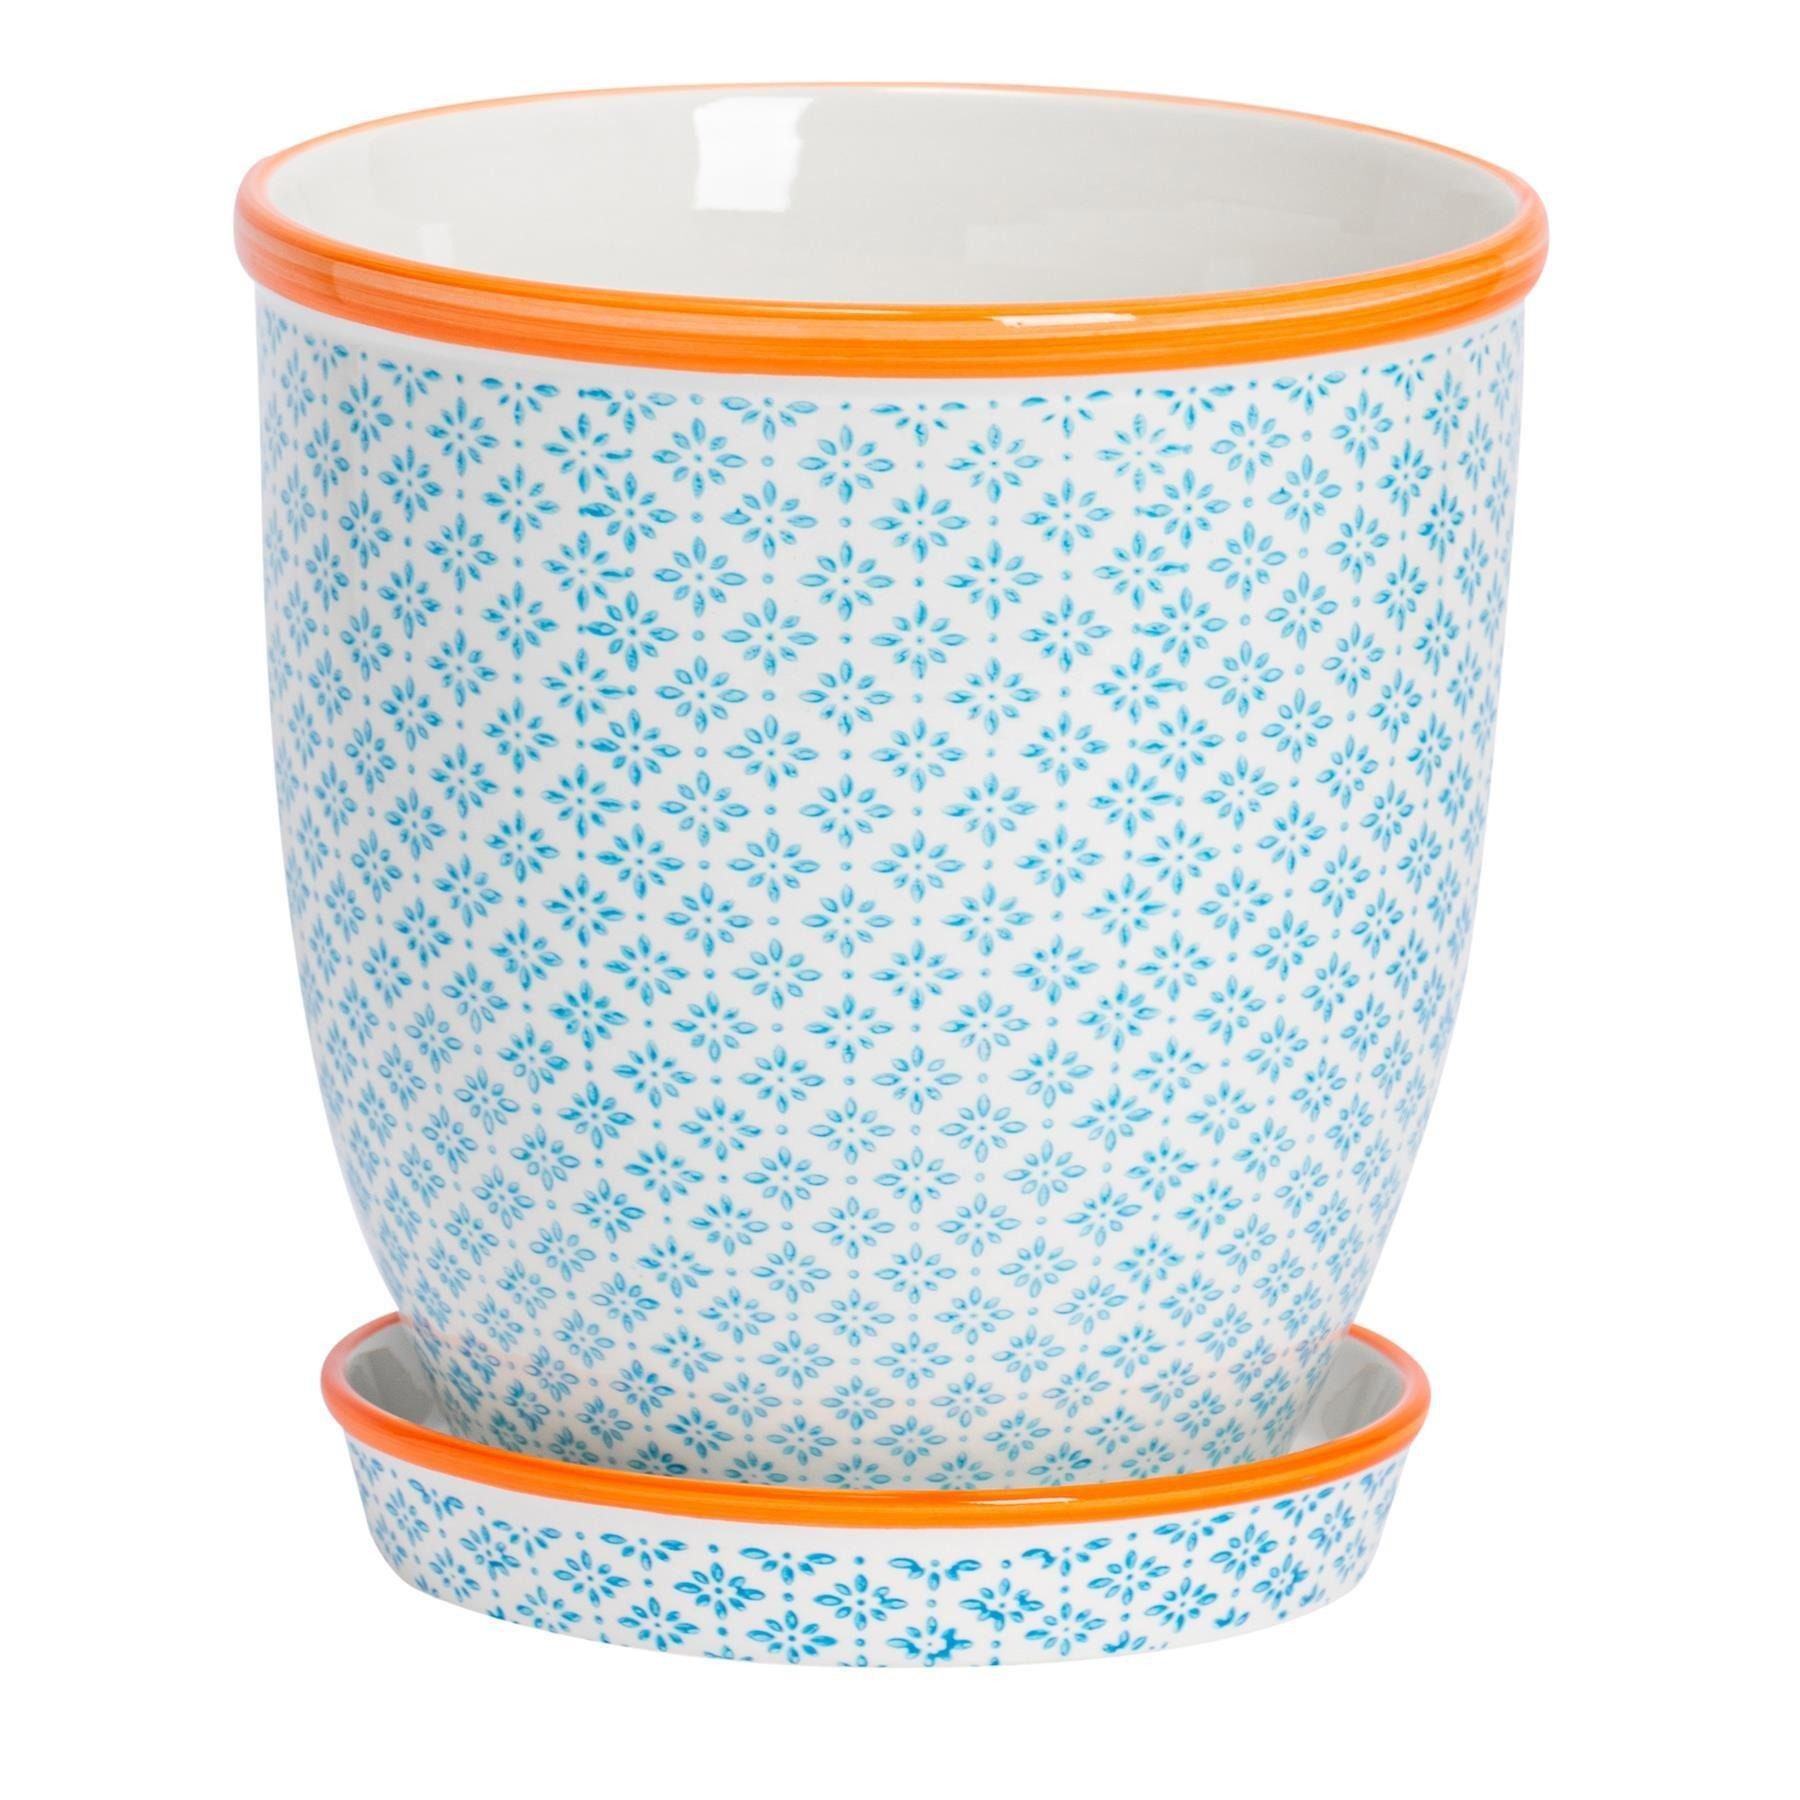 Hand-Printed Plant Pot with Saucer 20.5cm - image 1